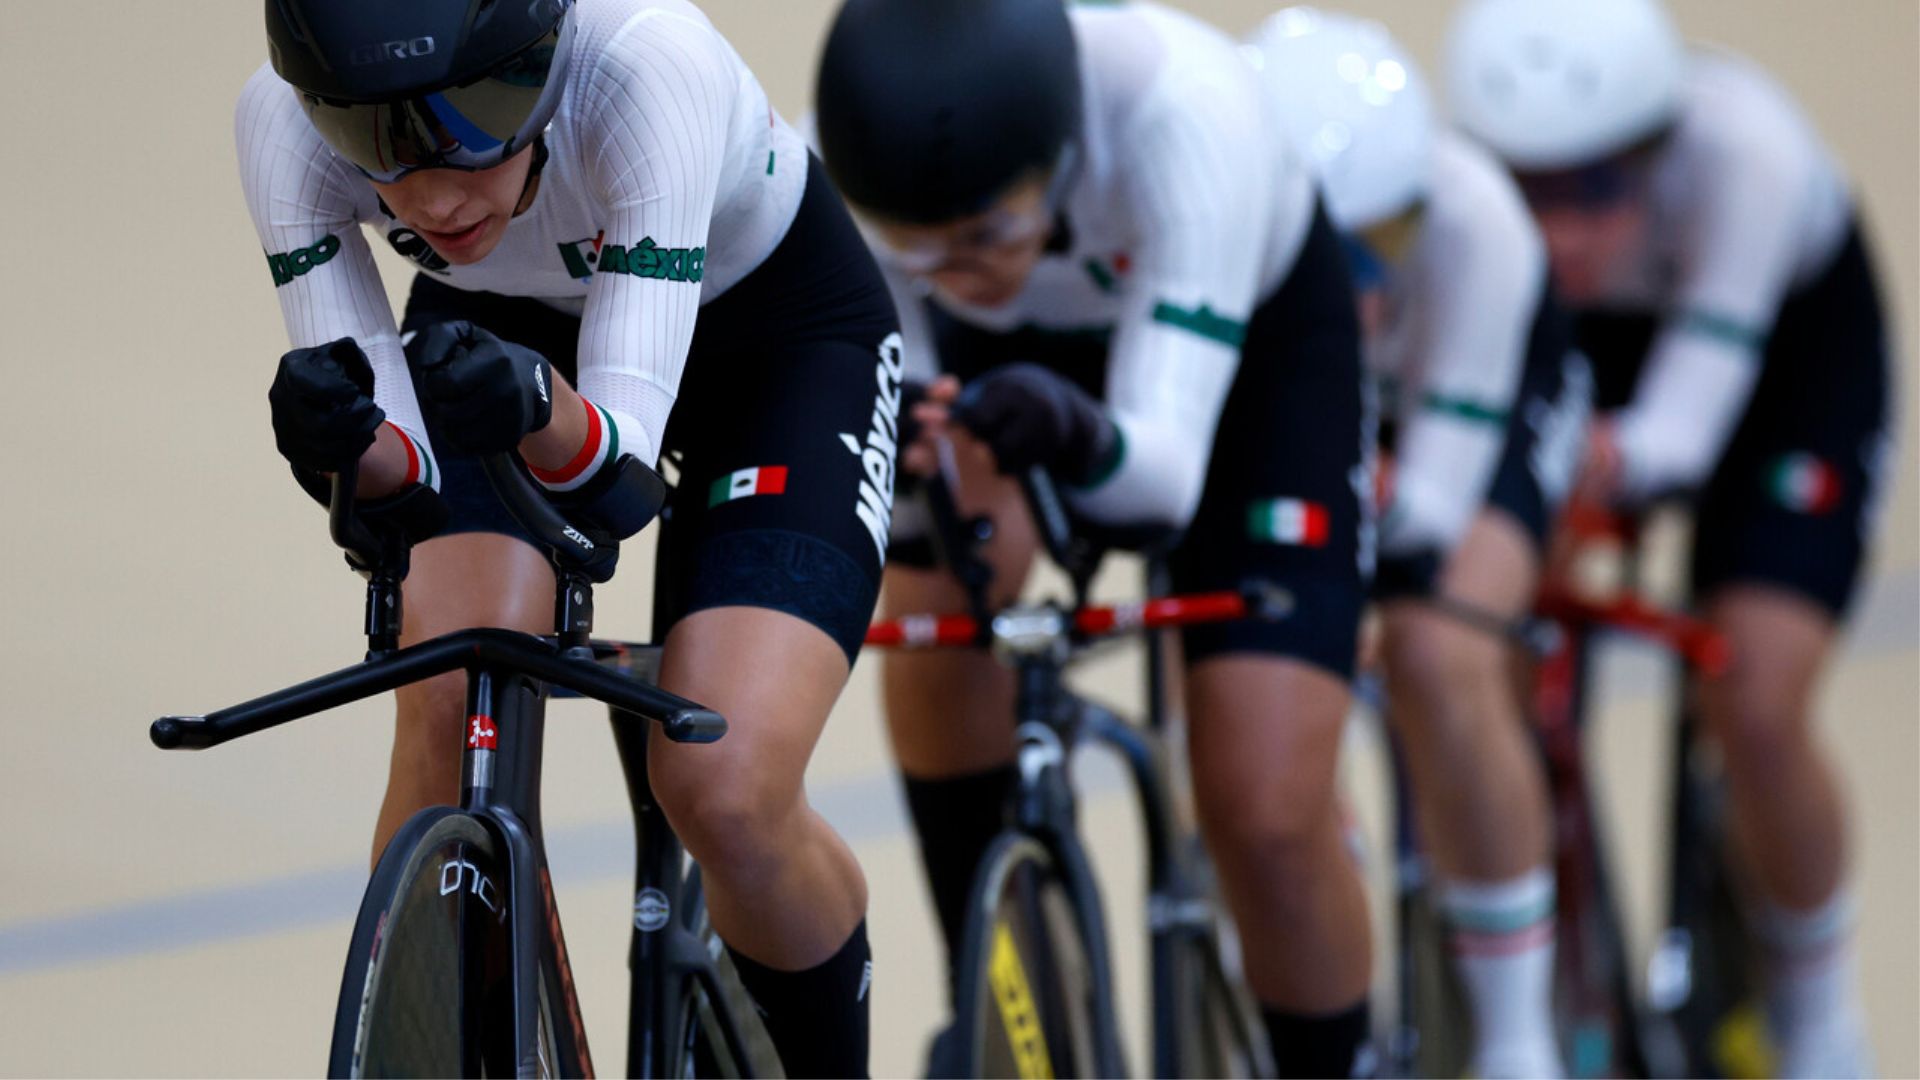 Mexico and Colombia aim to repeat gold in track cycling sprint